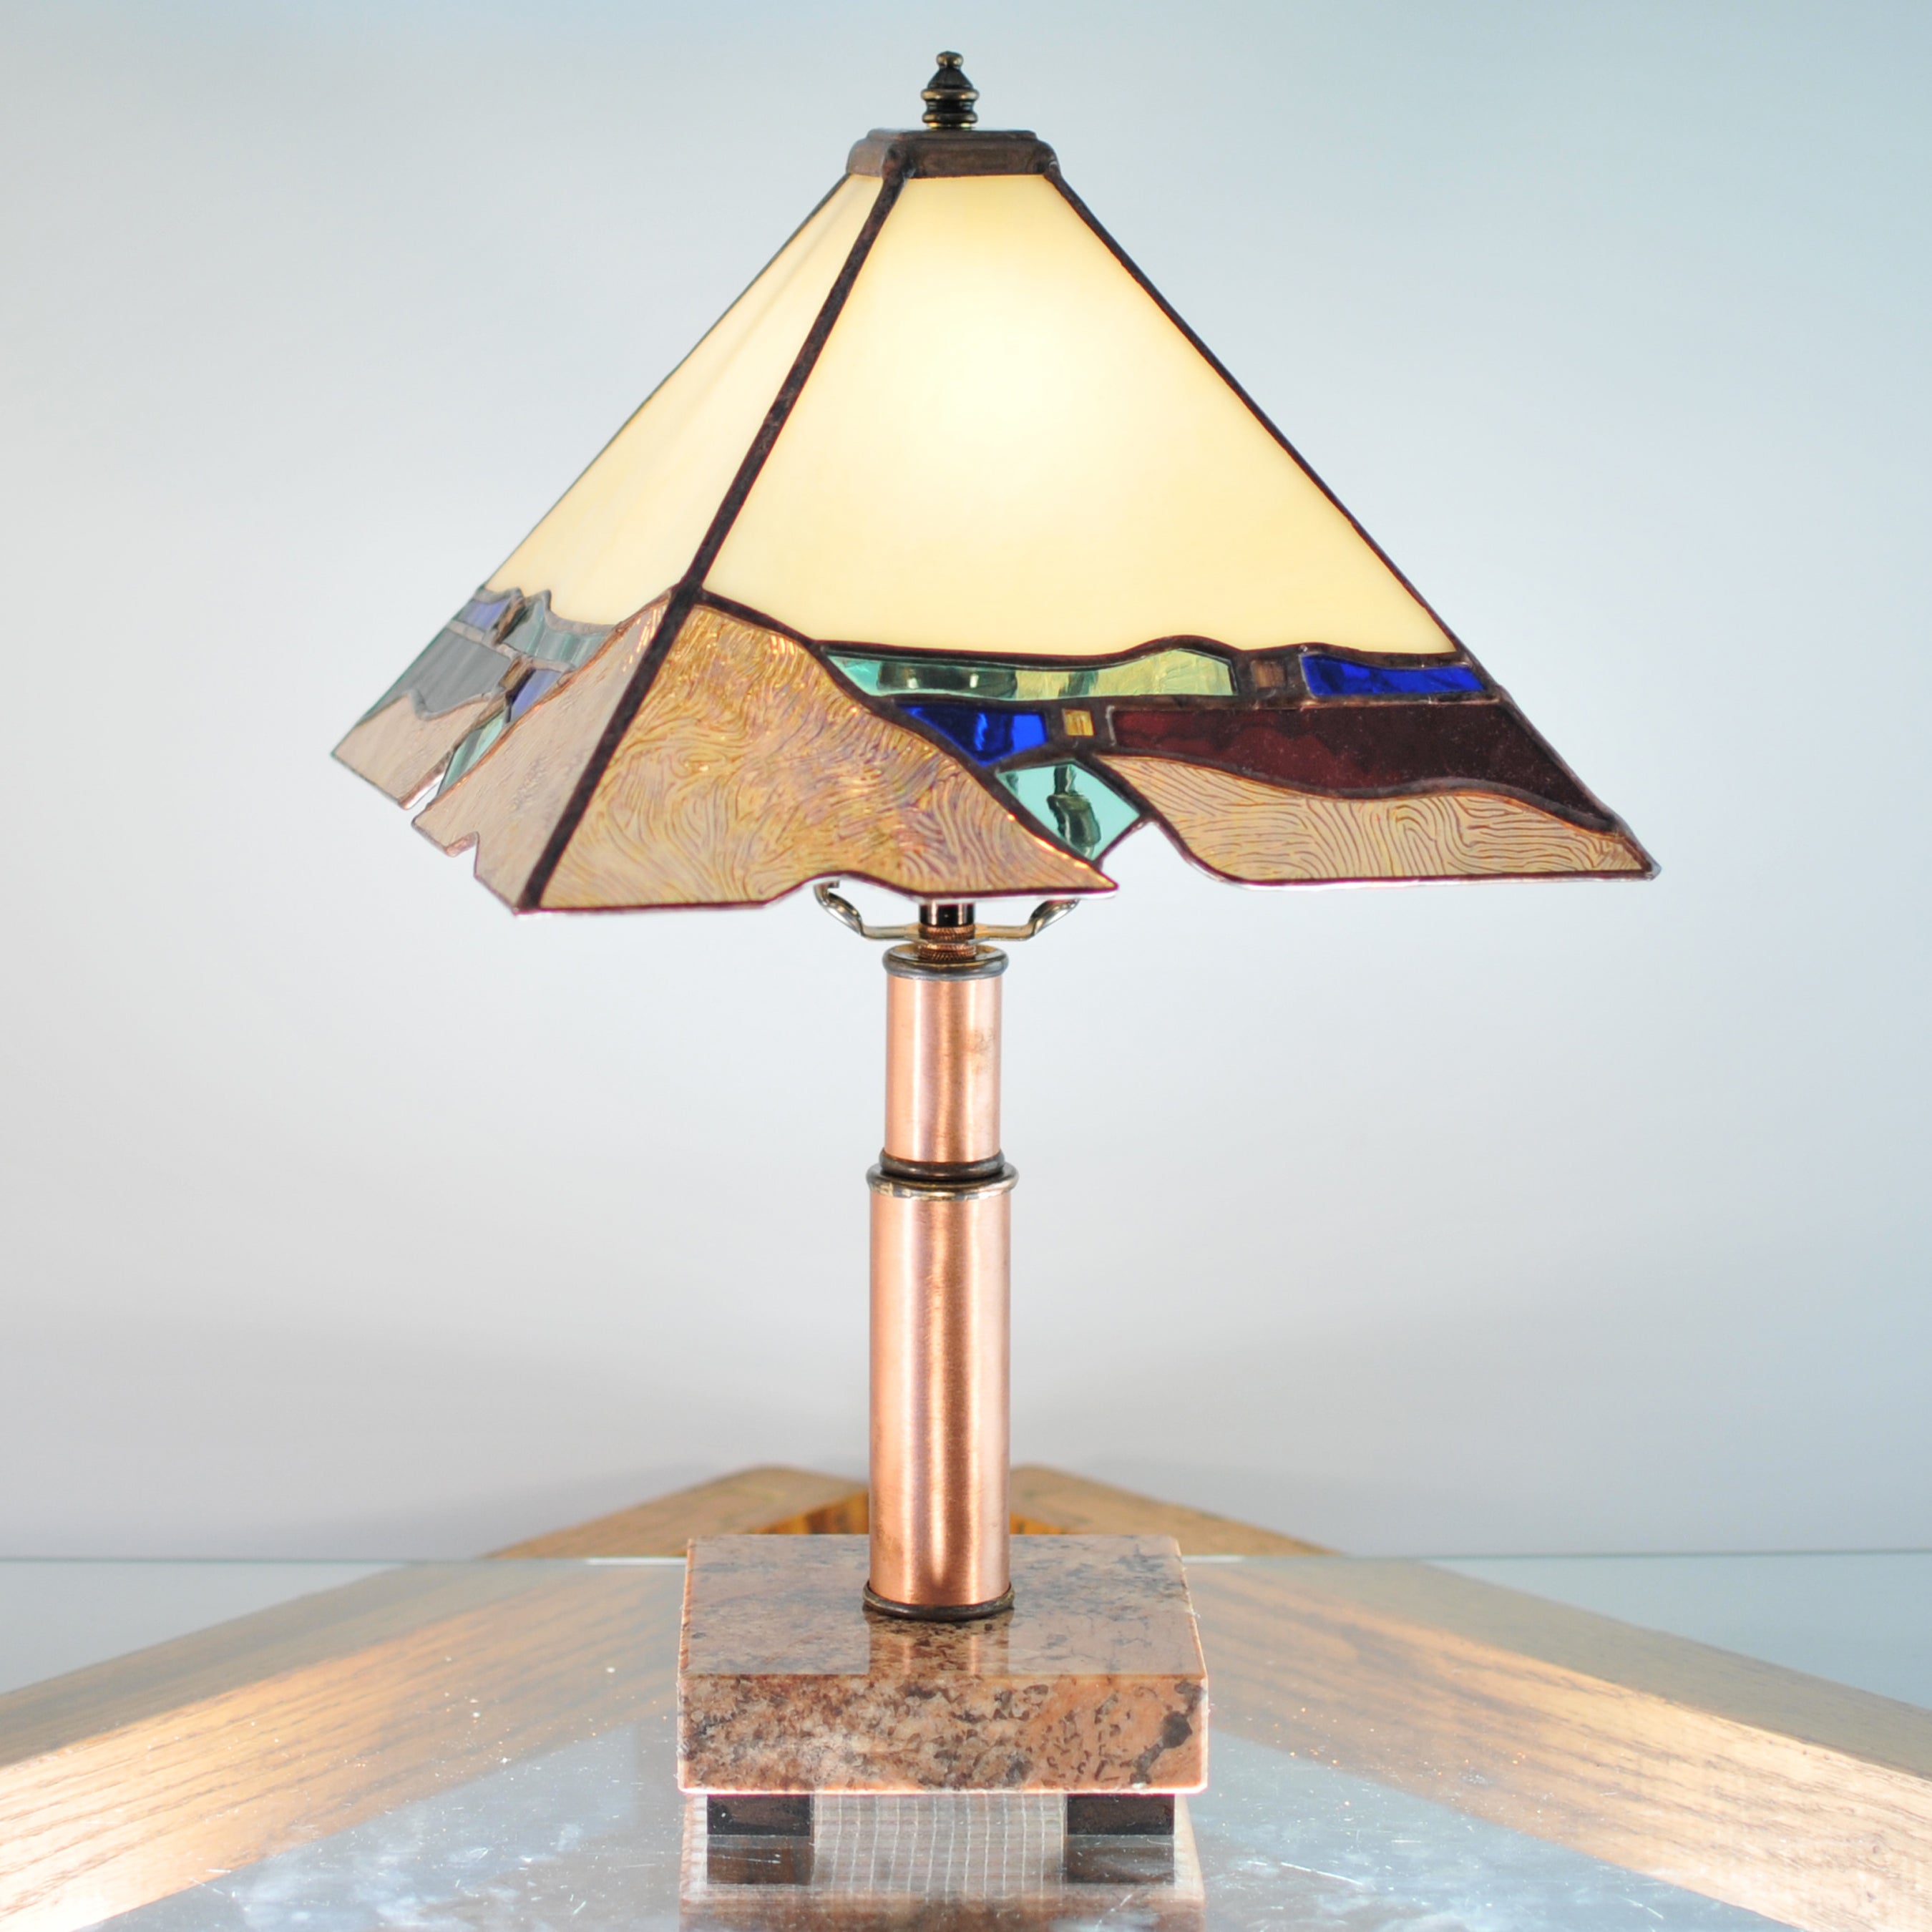 Small stained glass lamp with organic and architectural lines. Mission style / Prairie style.